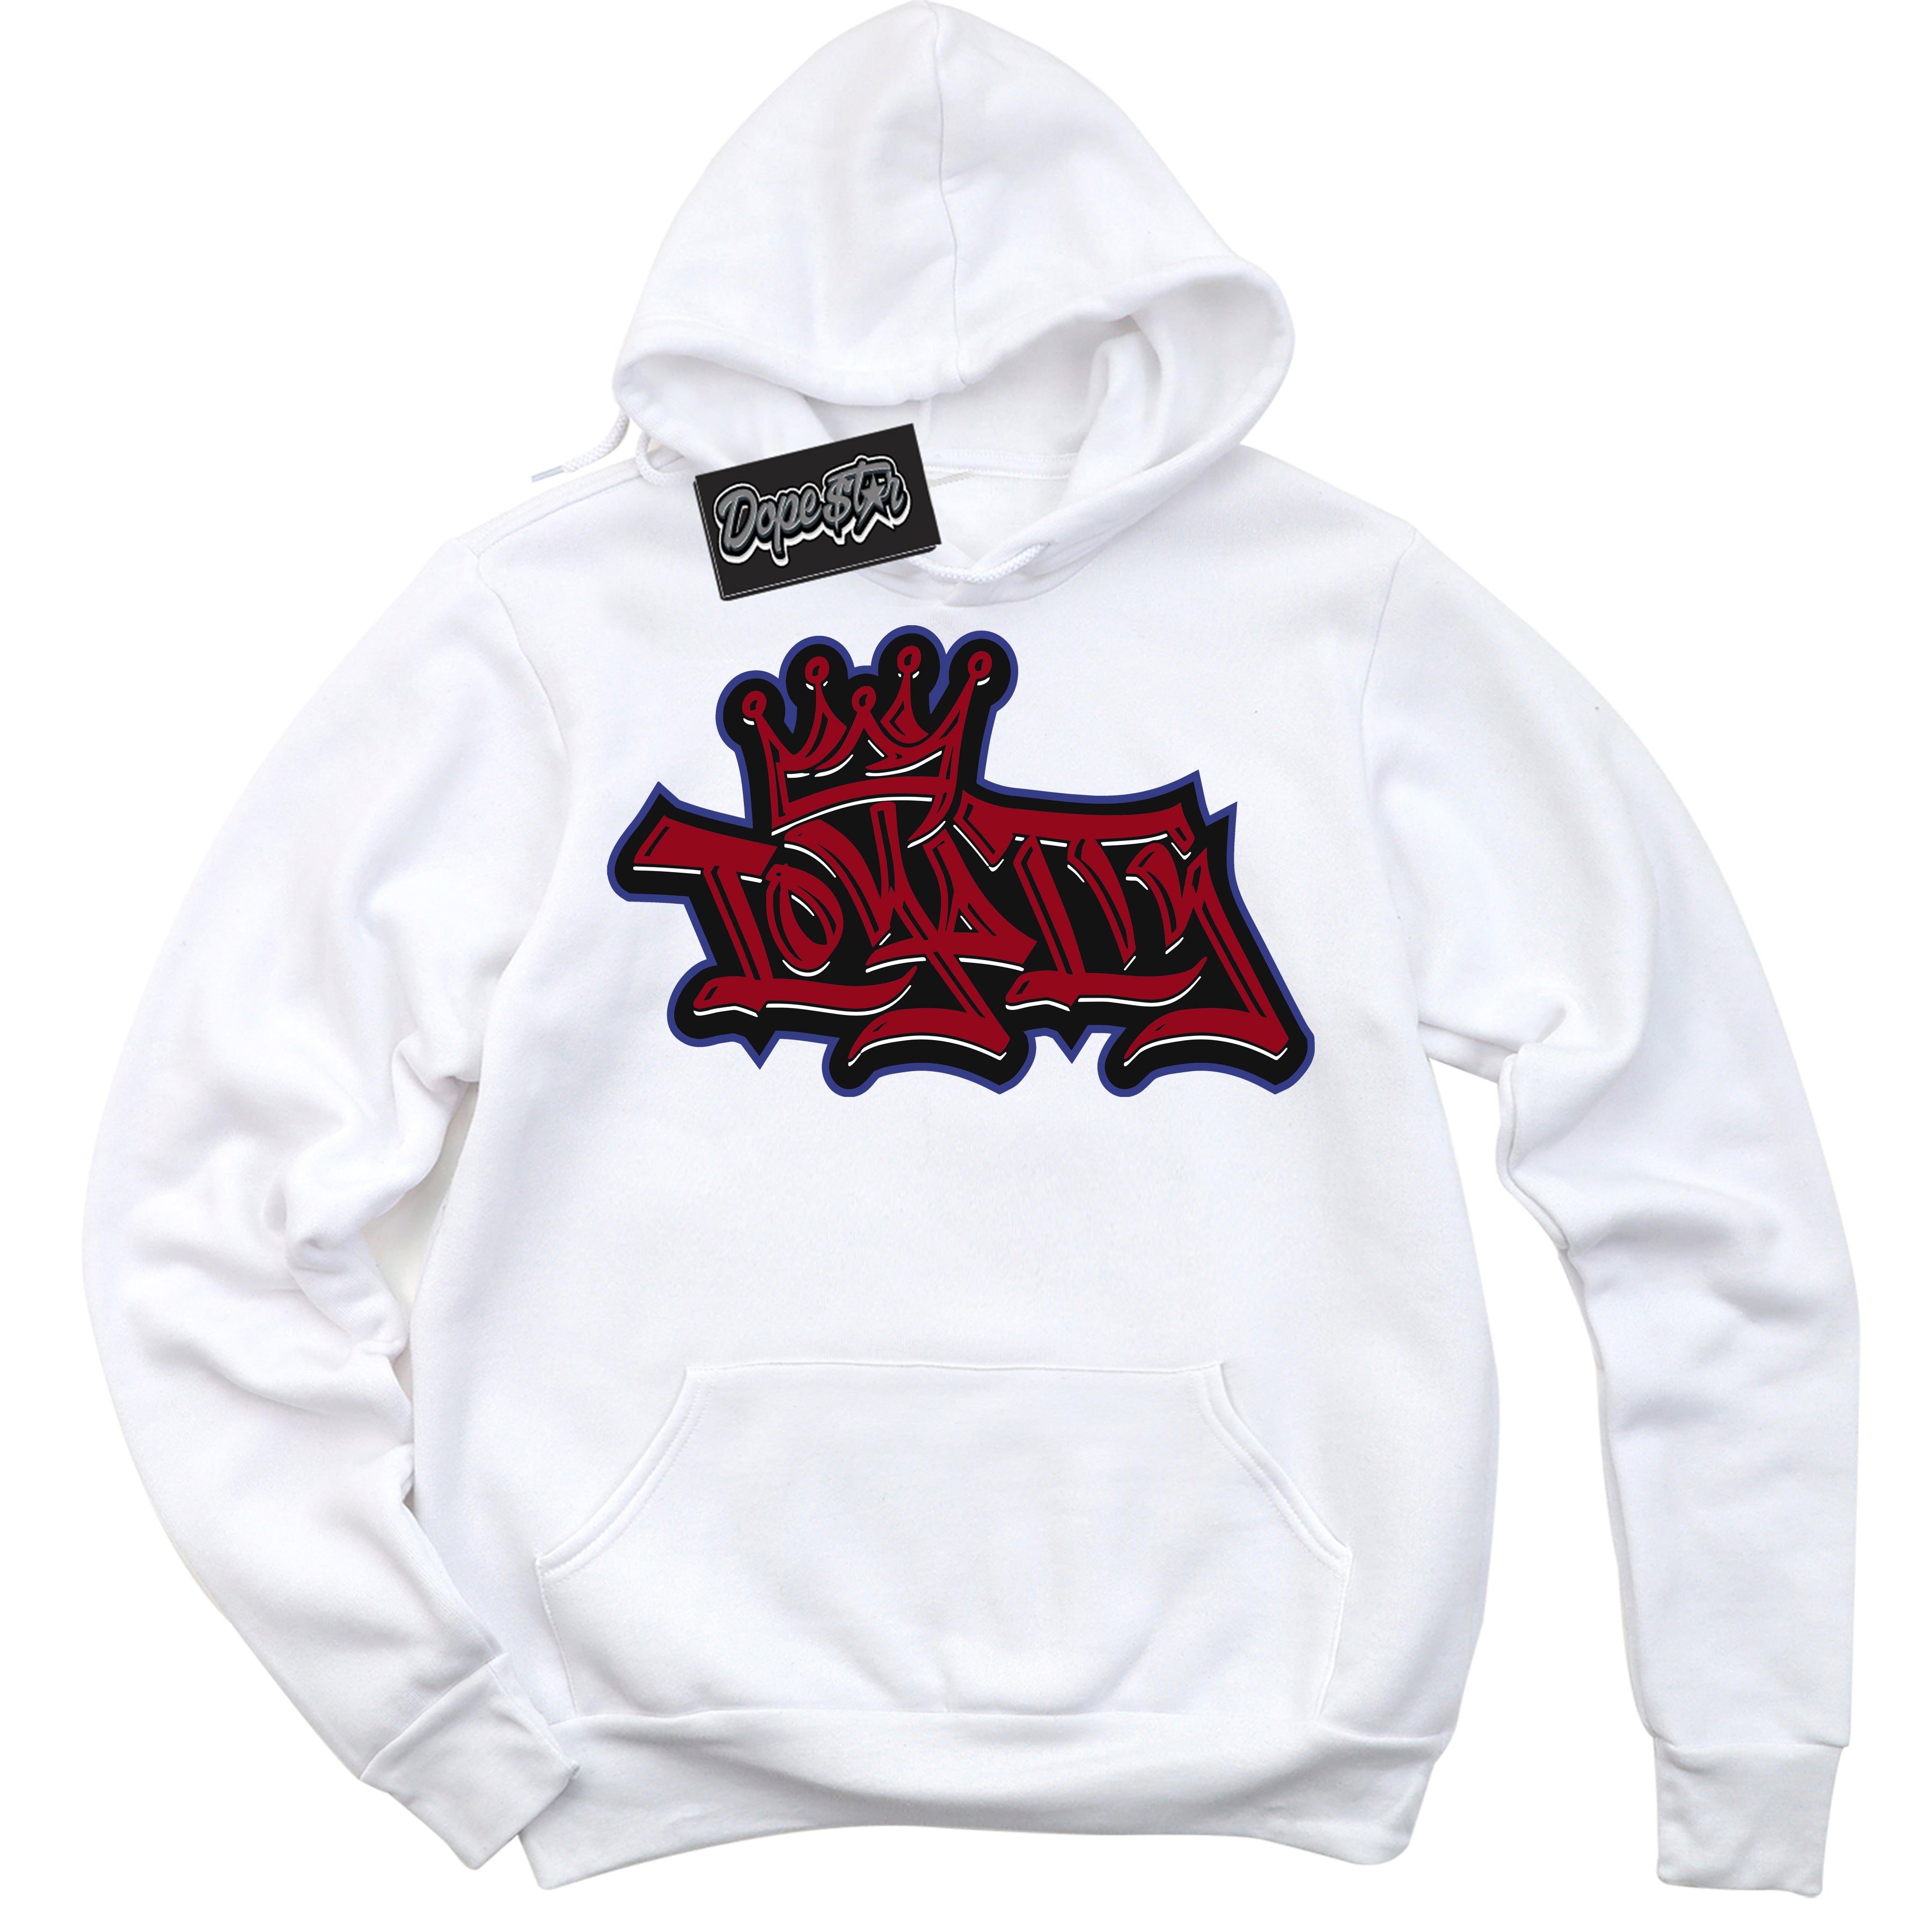 Cool White Hoodie with “ Loyalty Crown ”  design that Perfectly Matches Playoffs 8s Sneakers.